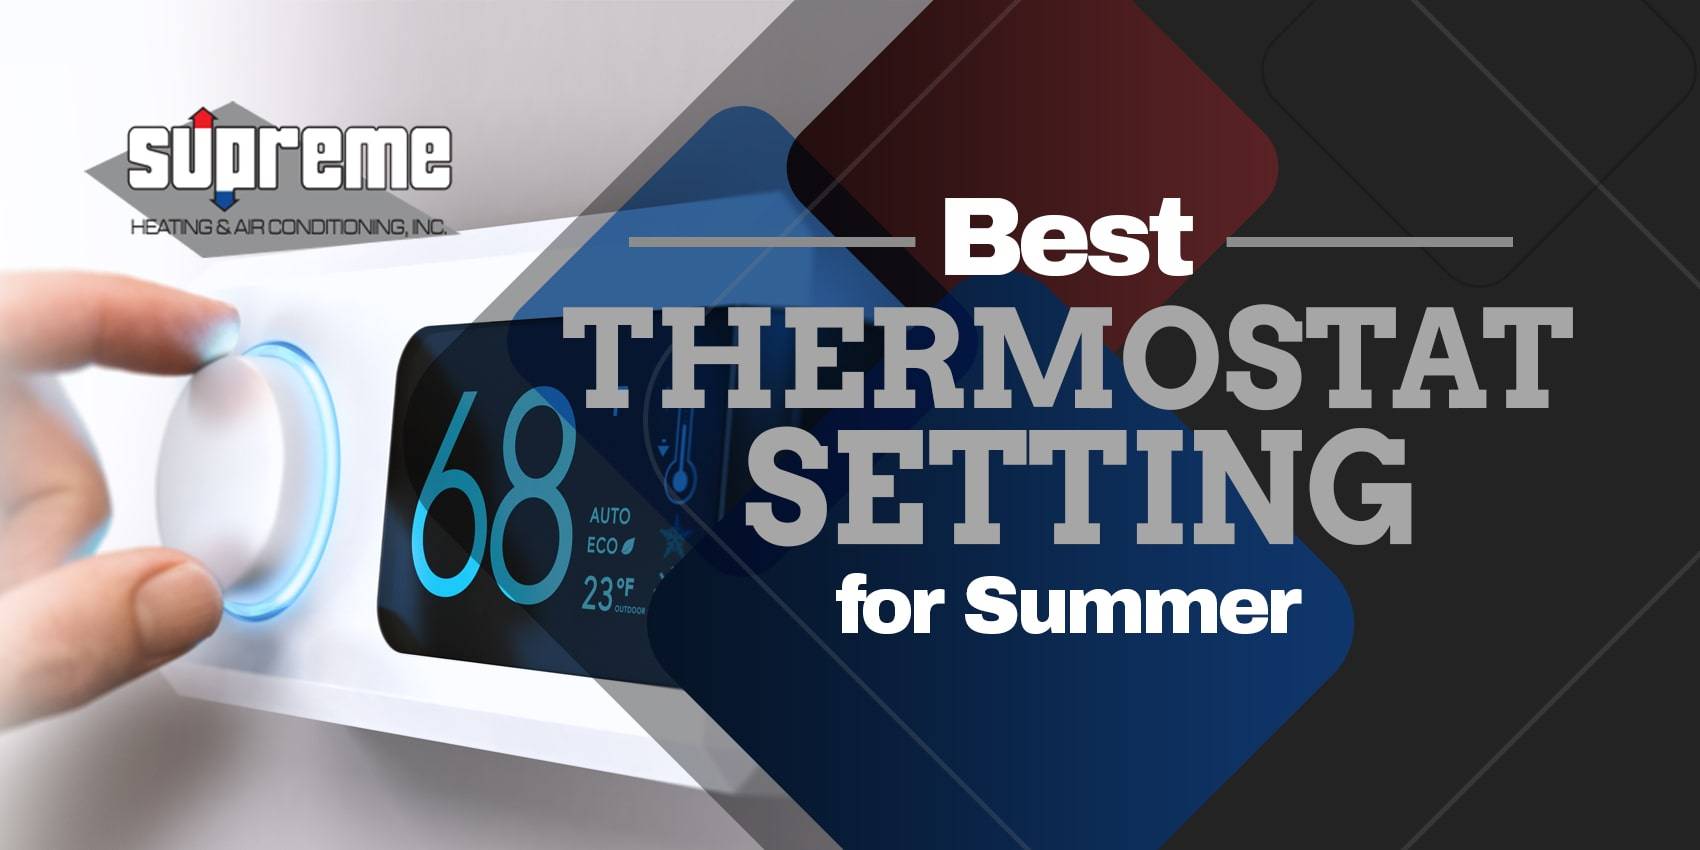 Best Thermostat Setting for Summer